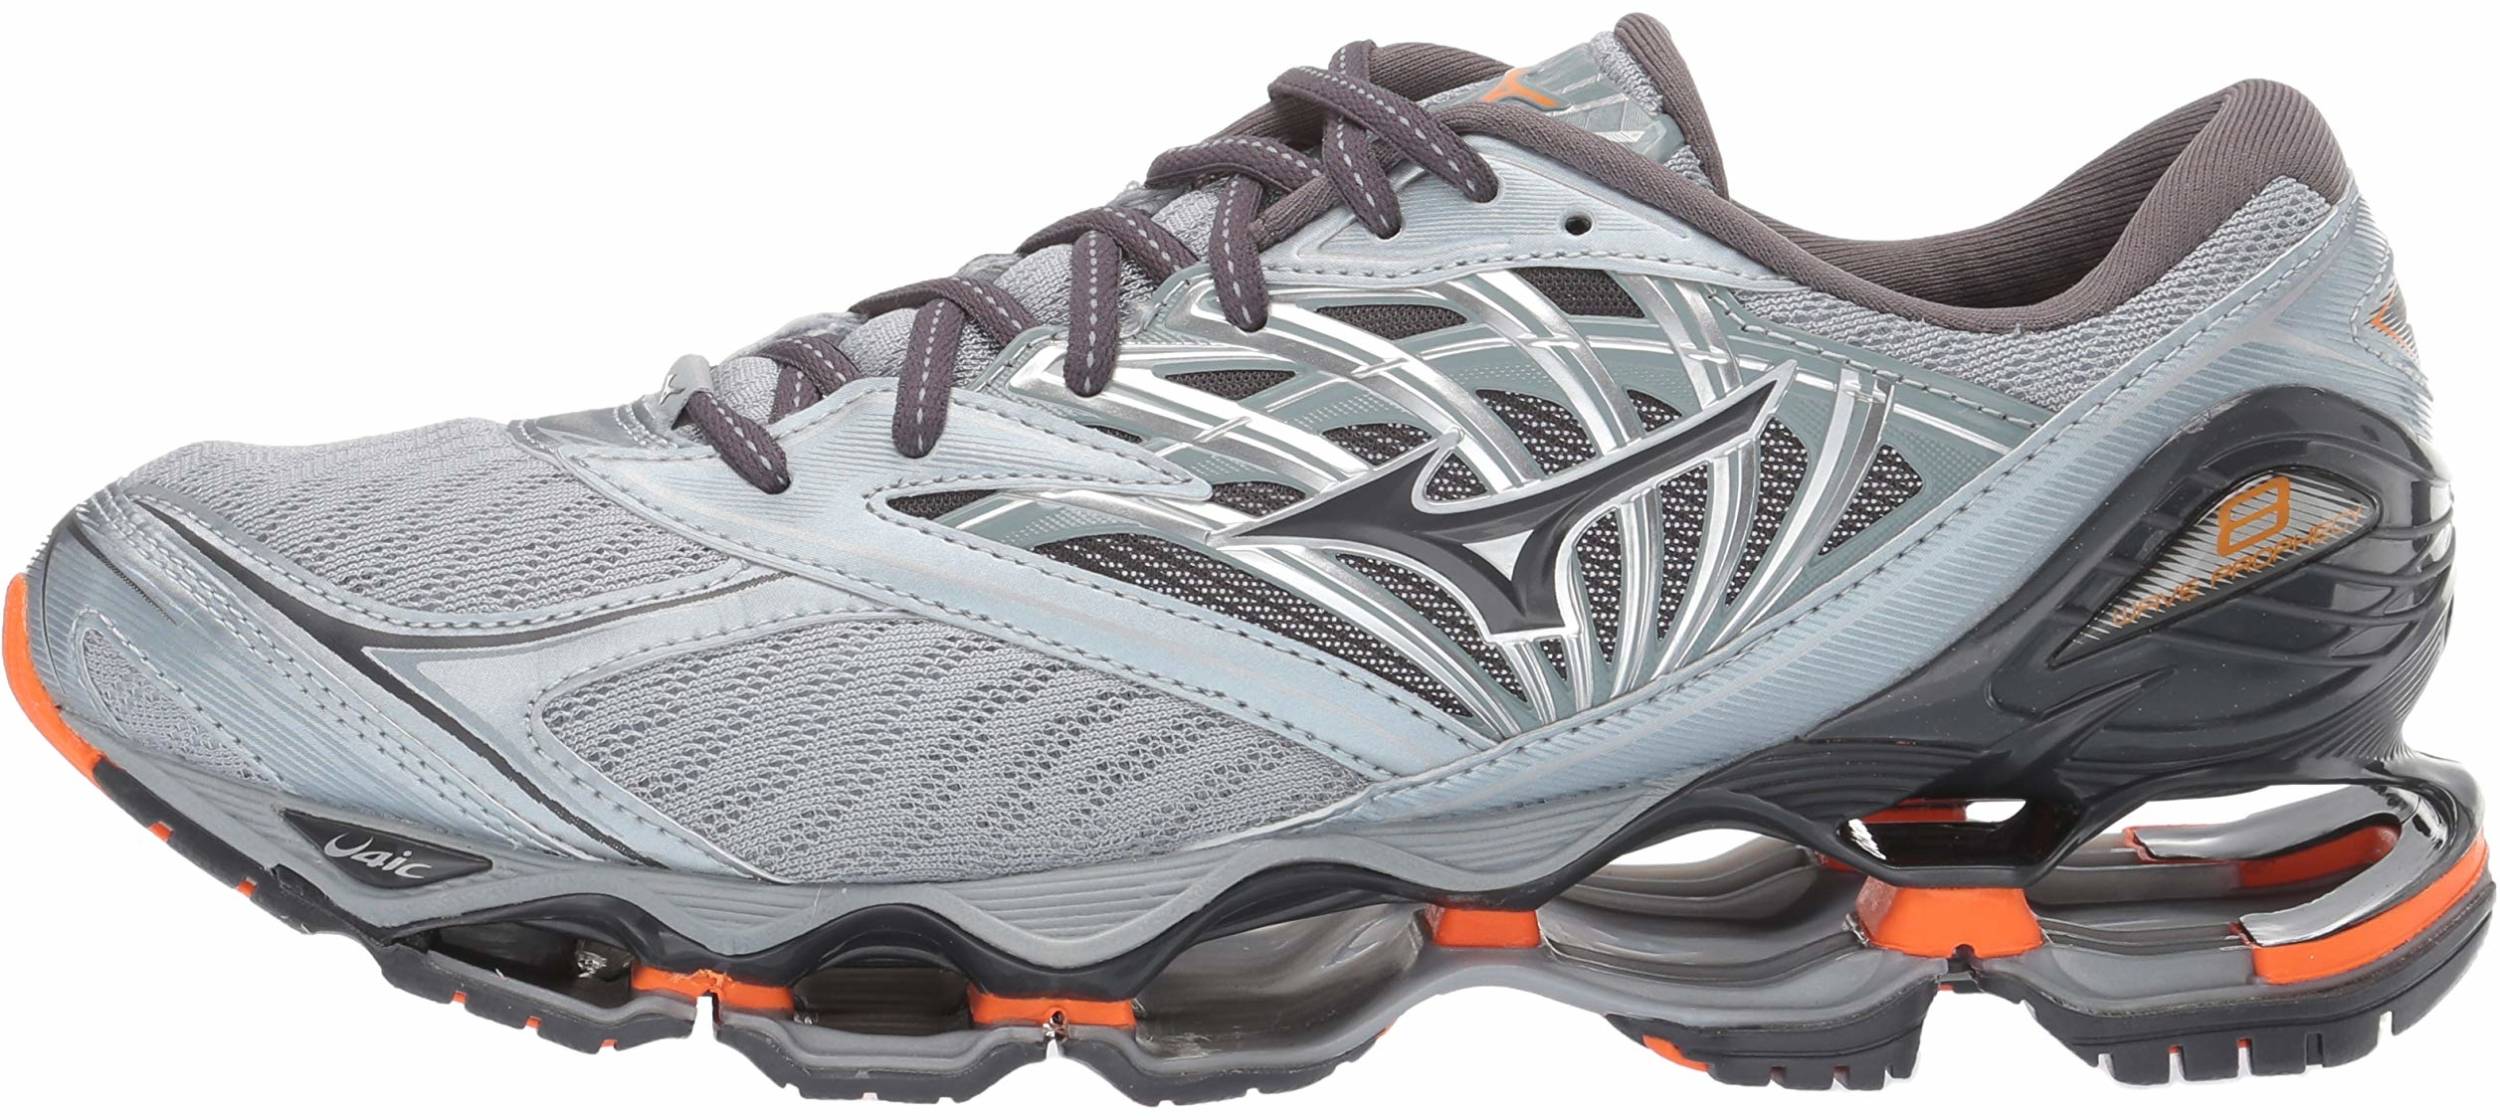 Mizuno Wave Prophecy 8 Review 2022, Facts, Deals ($199) | RunRepeat